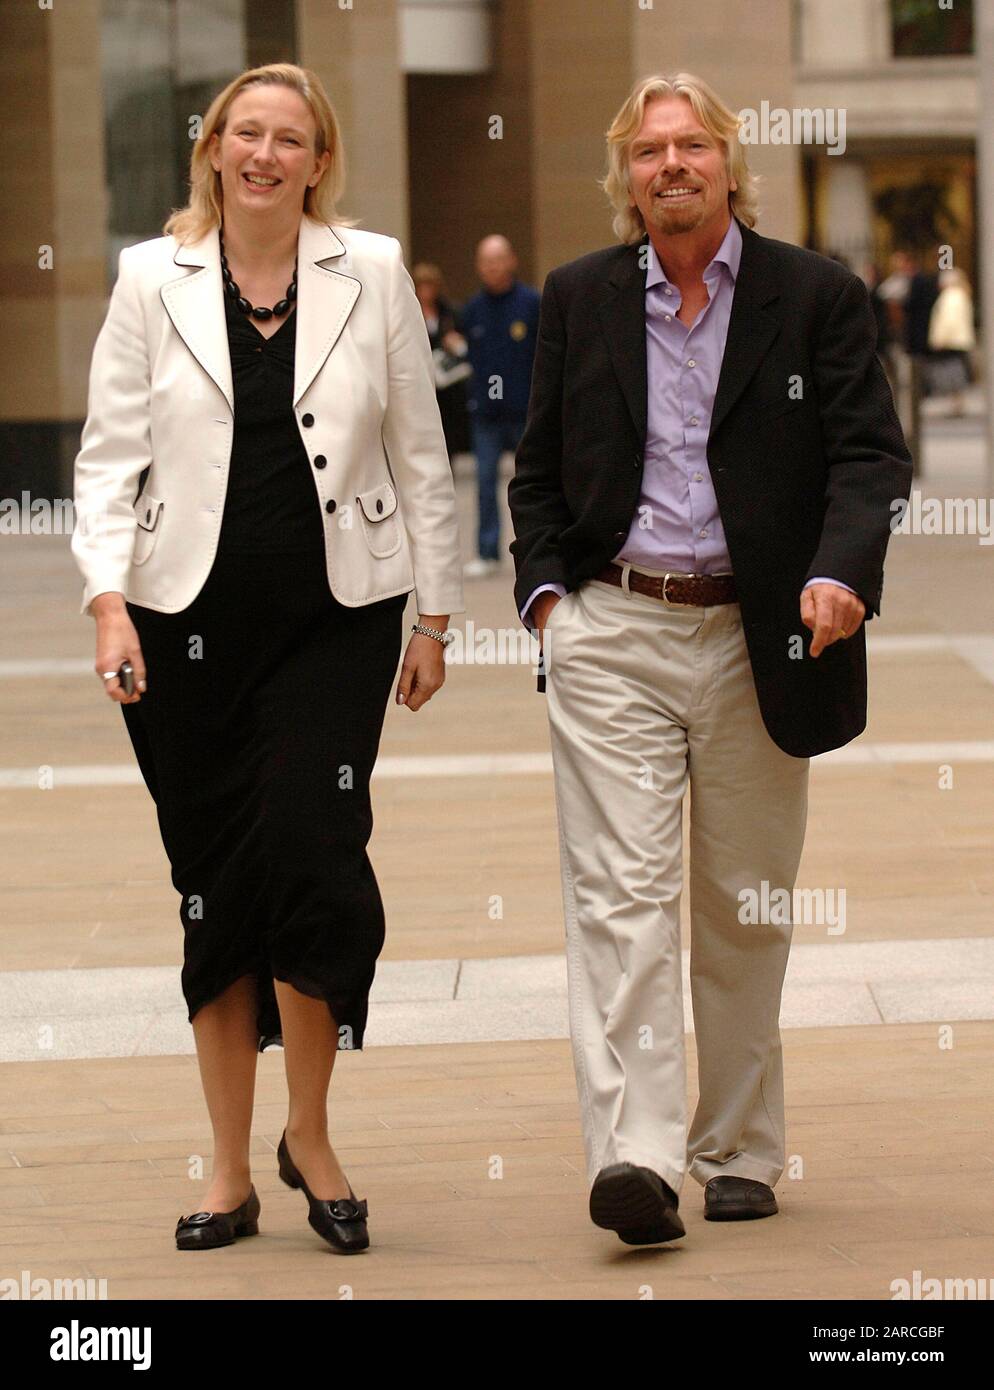 Jayne-Anne Gadhia CEO of Virgin money and Sir Richard Branson outside the Stock Exchange in London after announcing a deal involving Northern Rock building society in 2007. Stock Photo